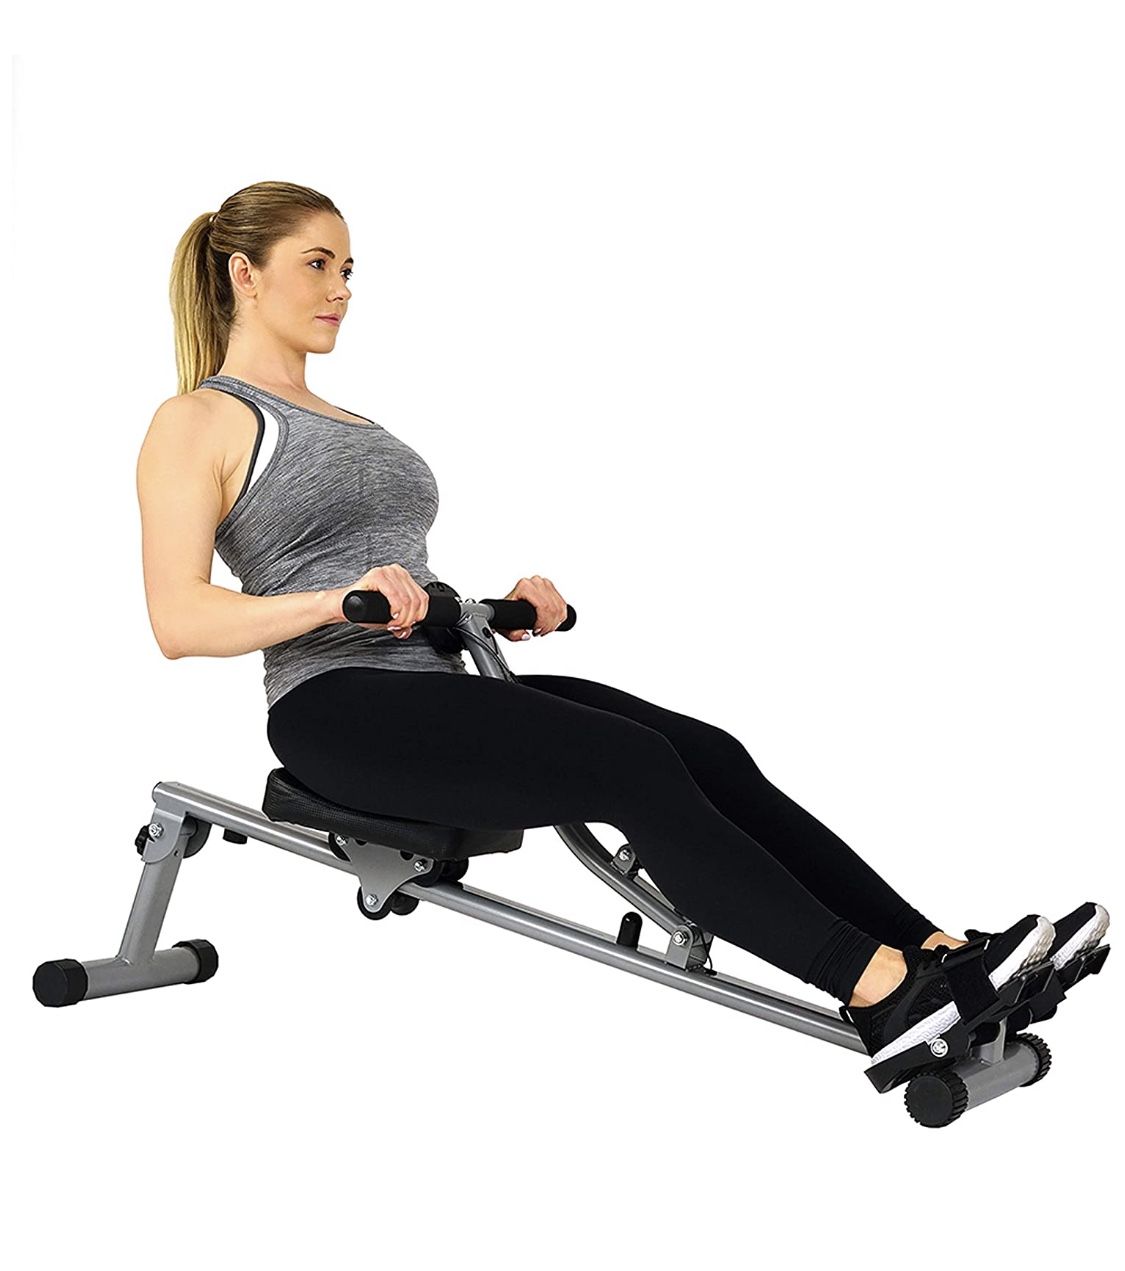 BRAND NEW HIGH QUALITY ADJUSTABLE ROWING MACHINE ROWER WITH DIGITAL MONITOR